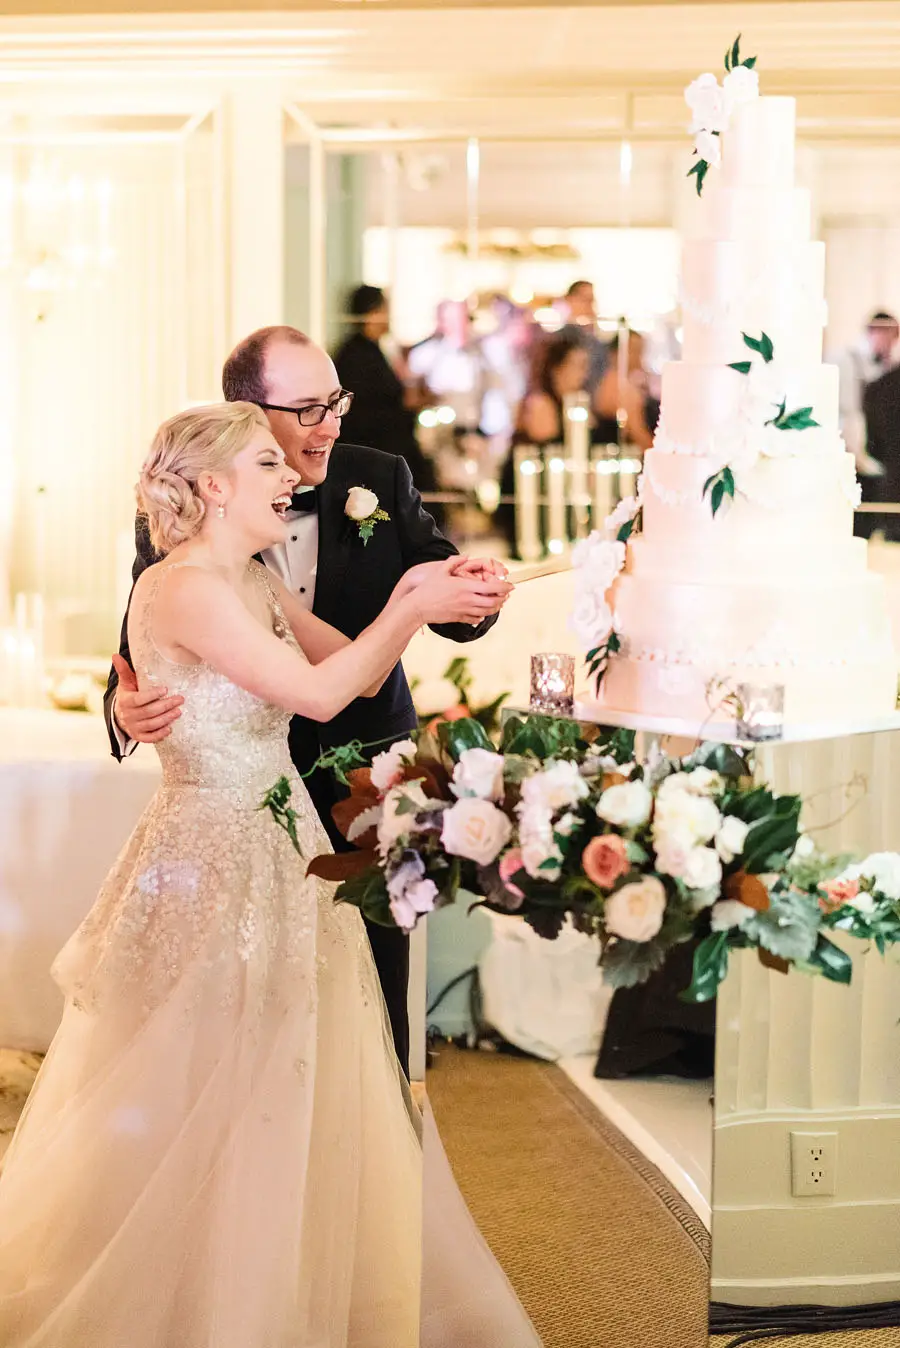 Bride and Groom Cutting the Cake - ​Jana Williams Photography​